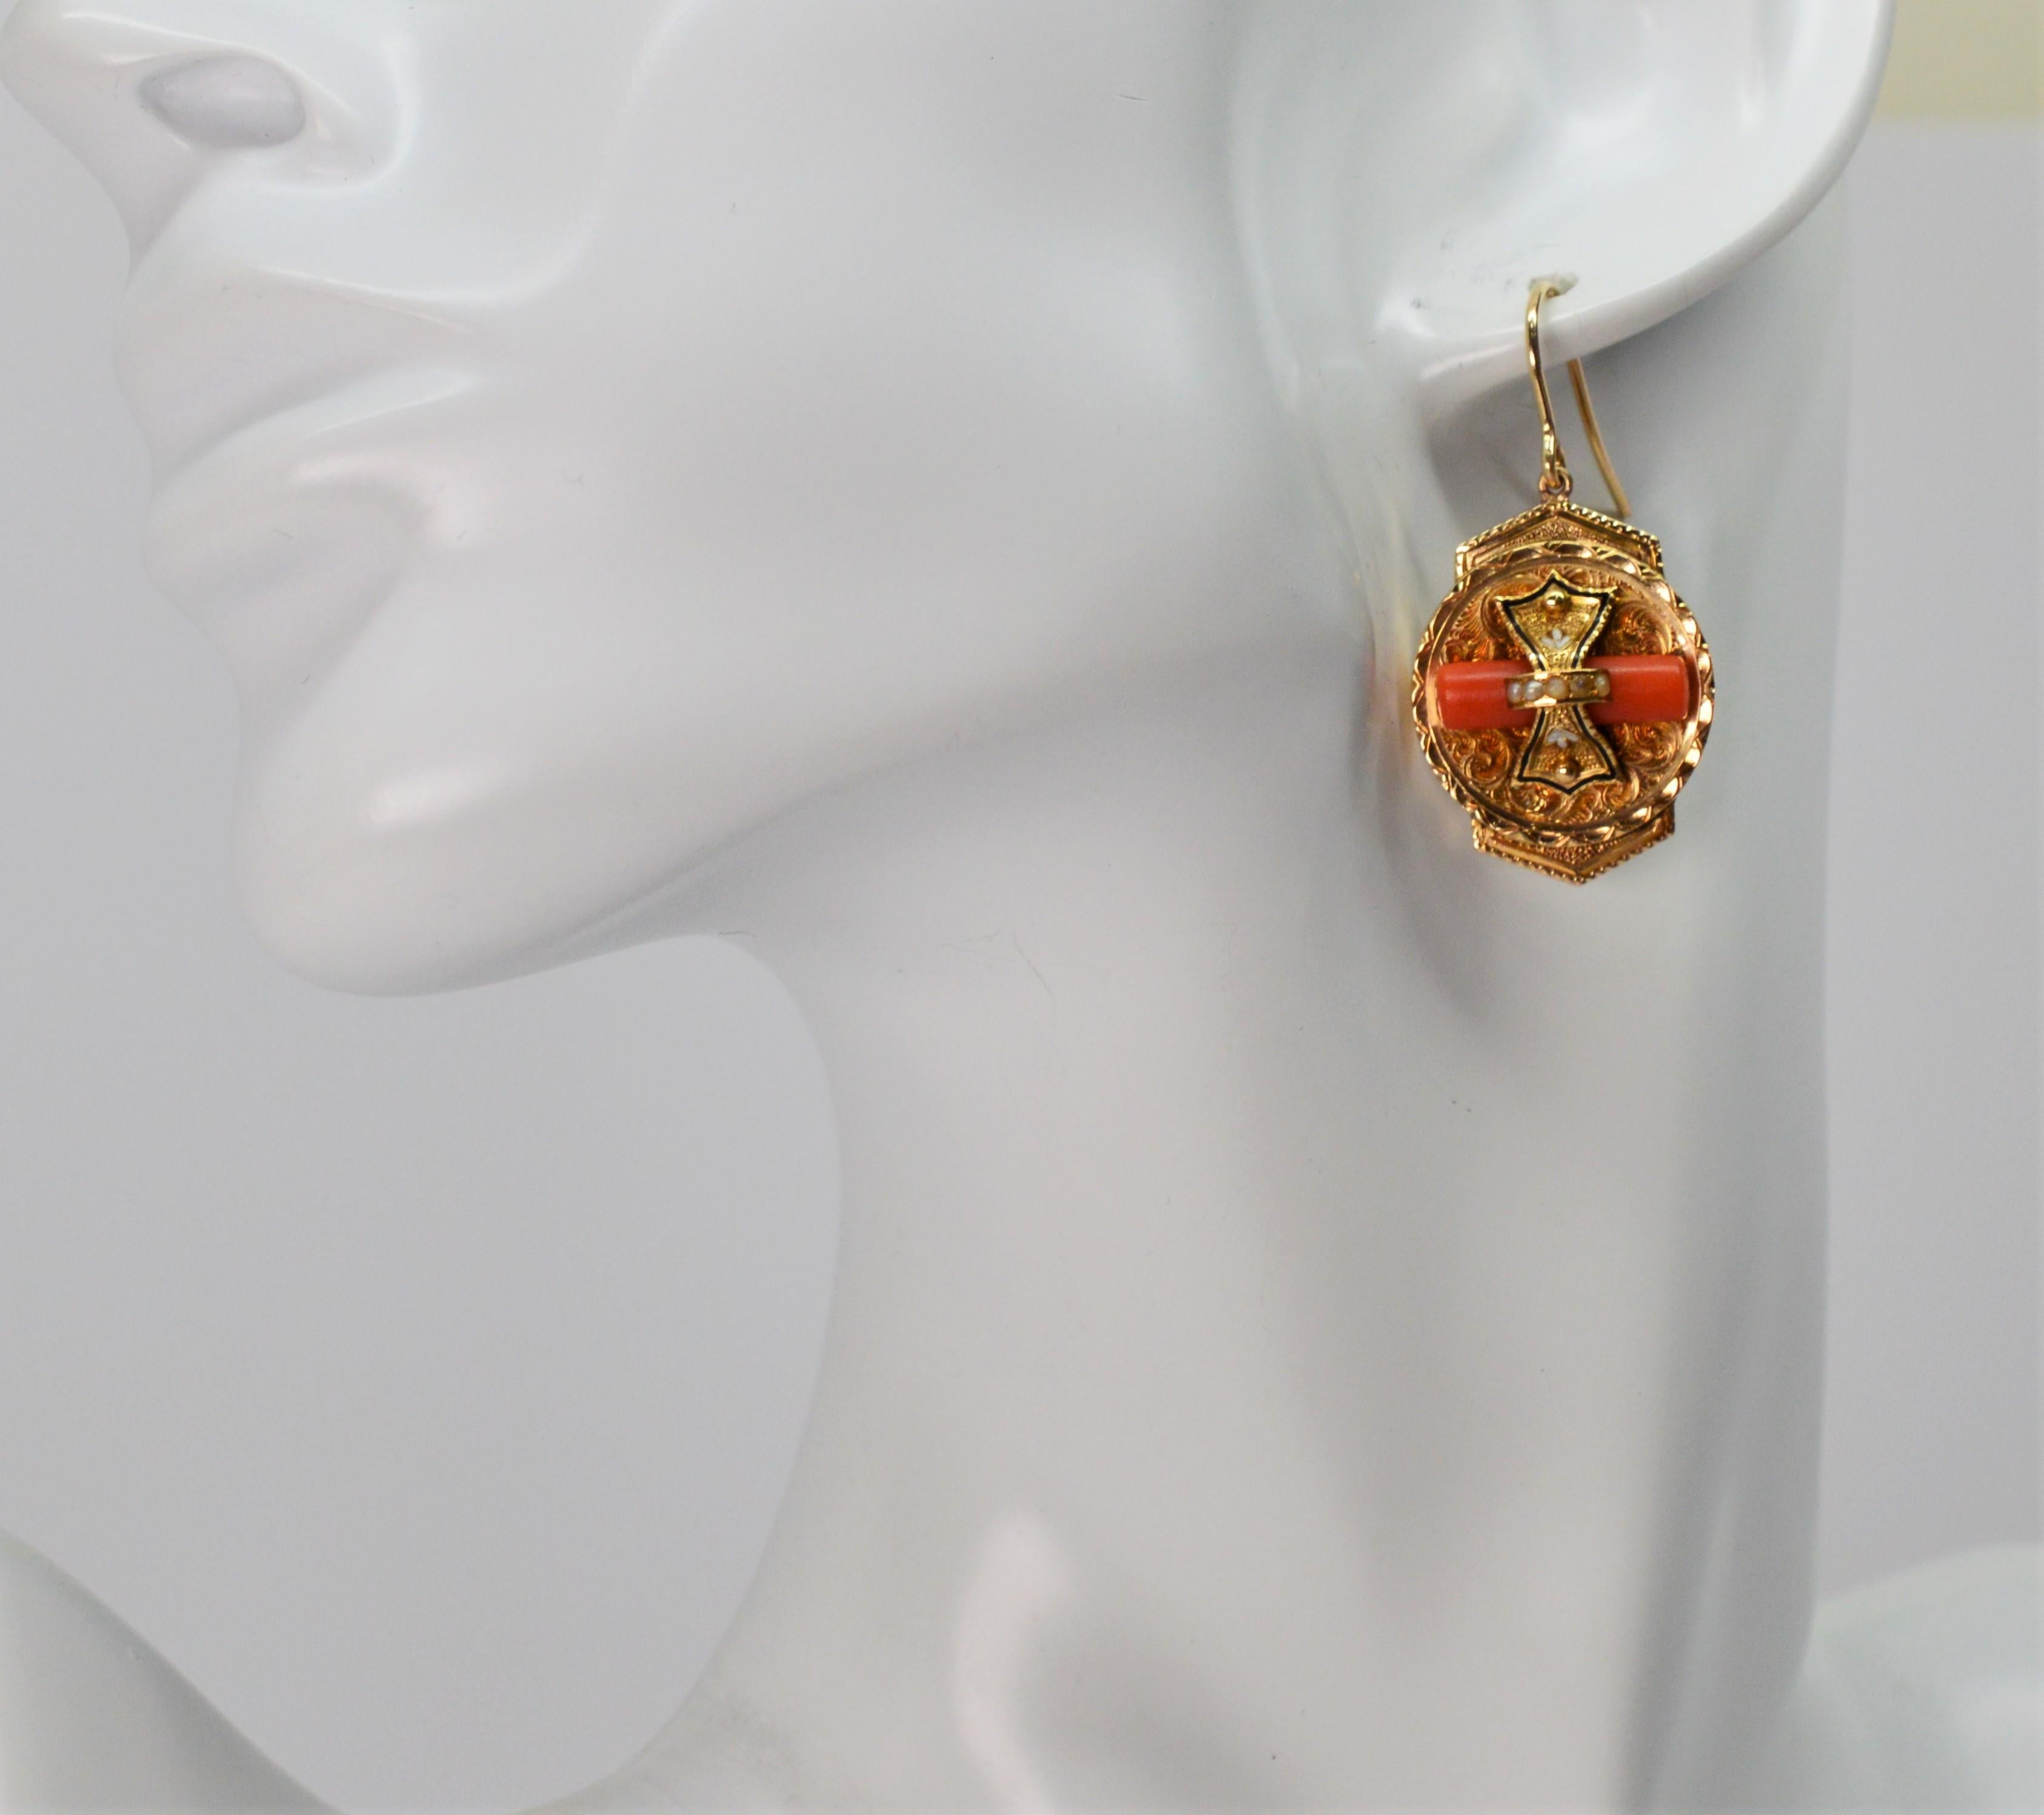 Victorian Medallion 14 Karat Yellow Gold Earrings with Coral and Pearl Accents For Sale 2